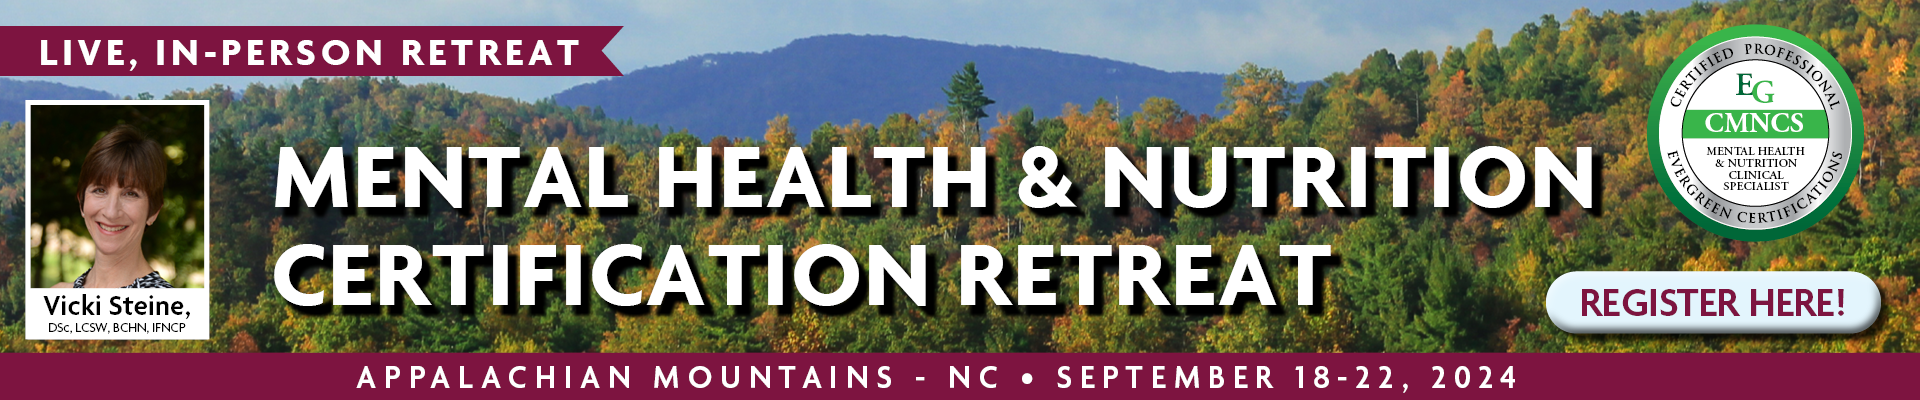 Mental Health and Nutrition Certification Retreat